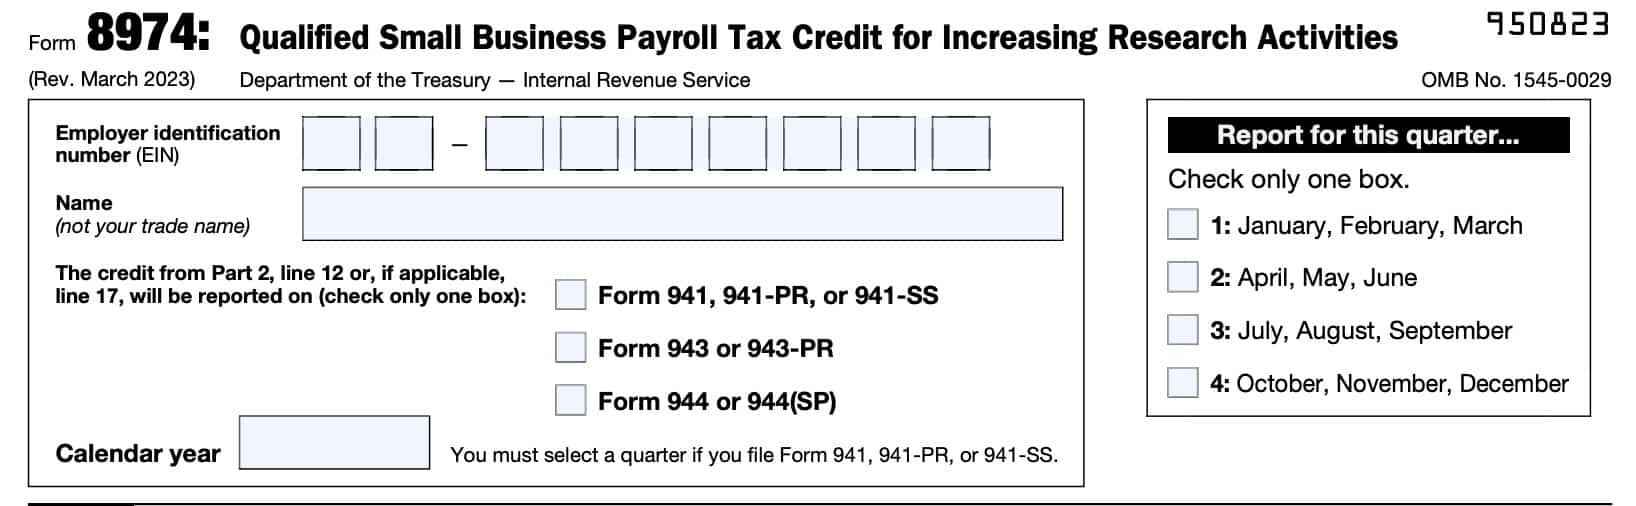 irs form 8974, top of form